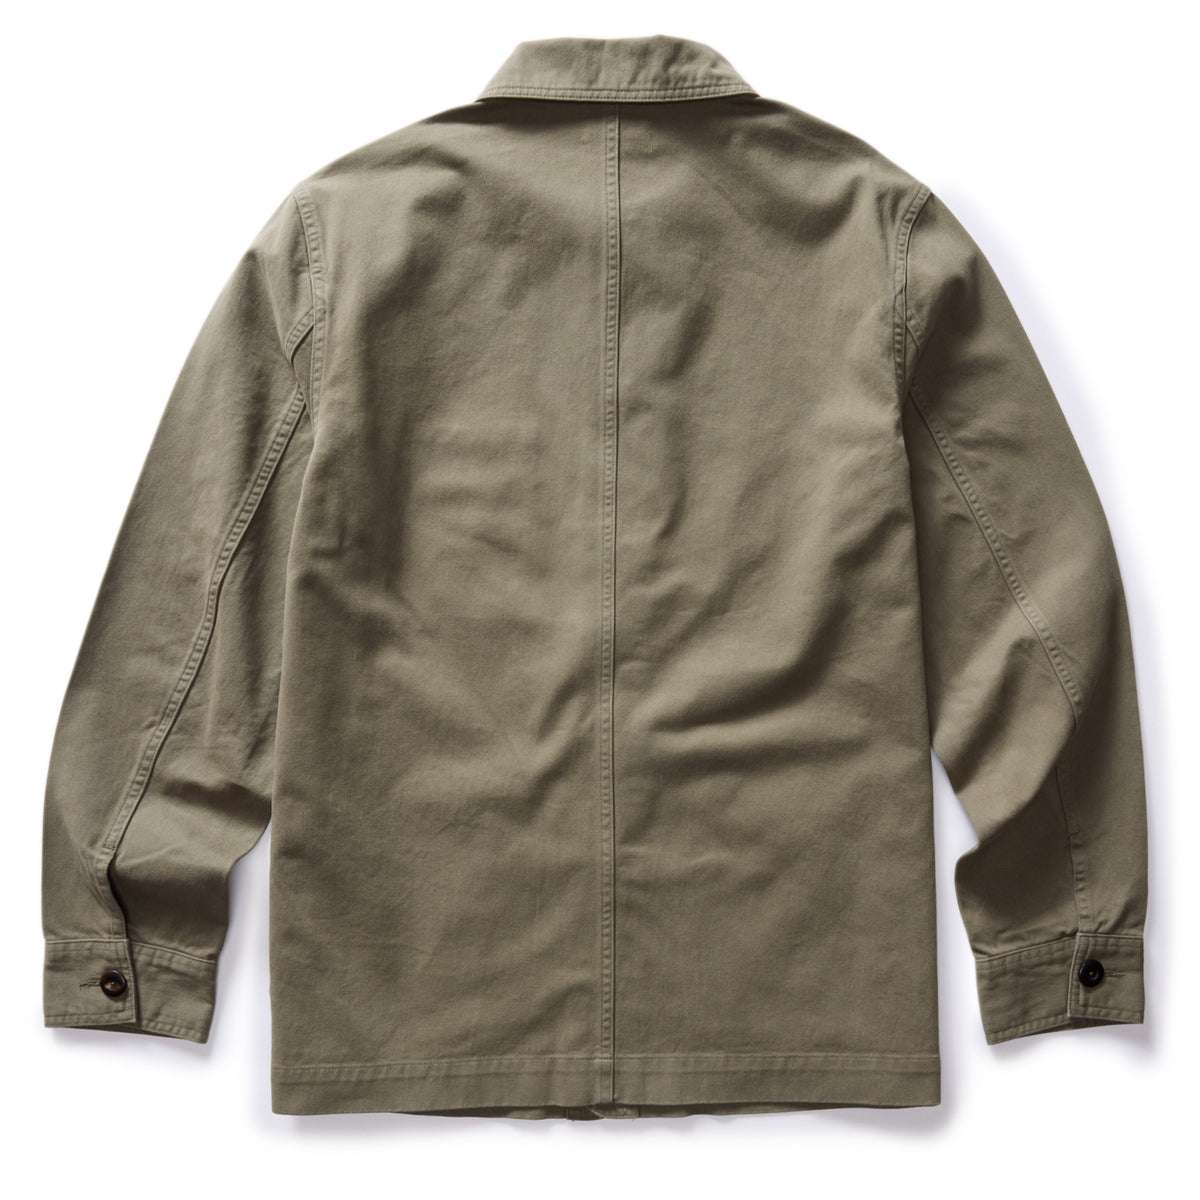 The Ojai Jacket in Organic Smoked Olive Foundation Twill